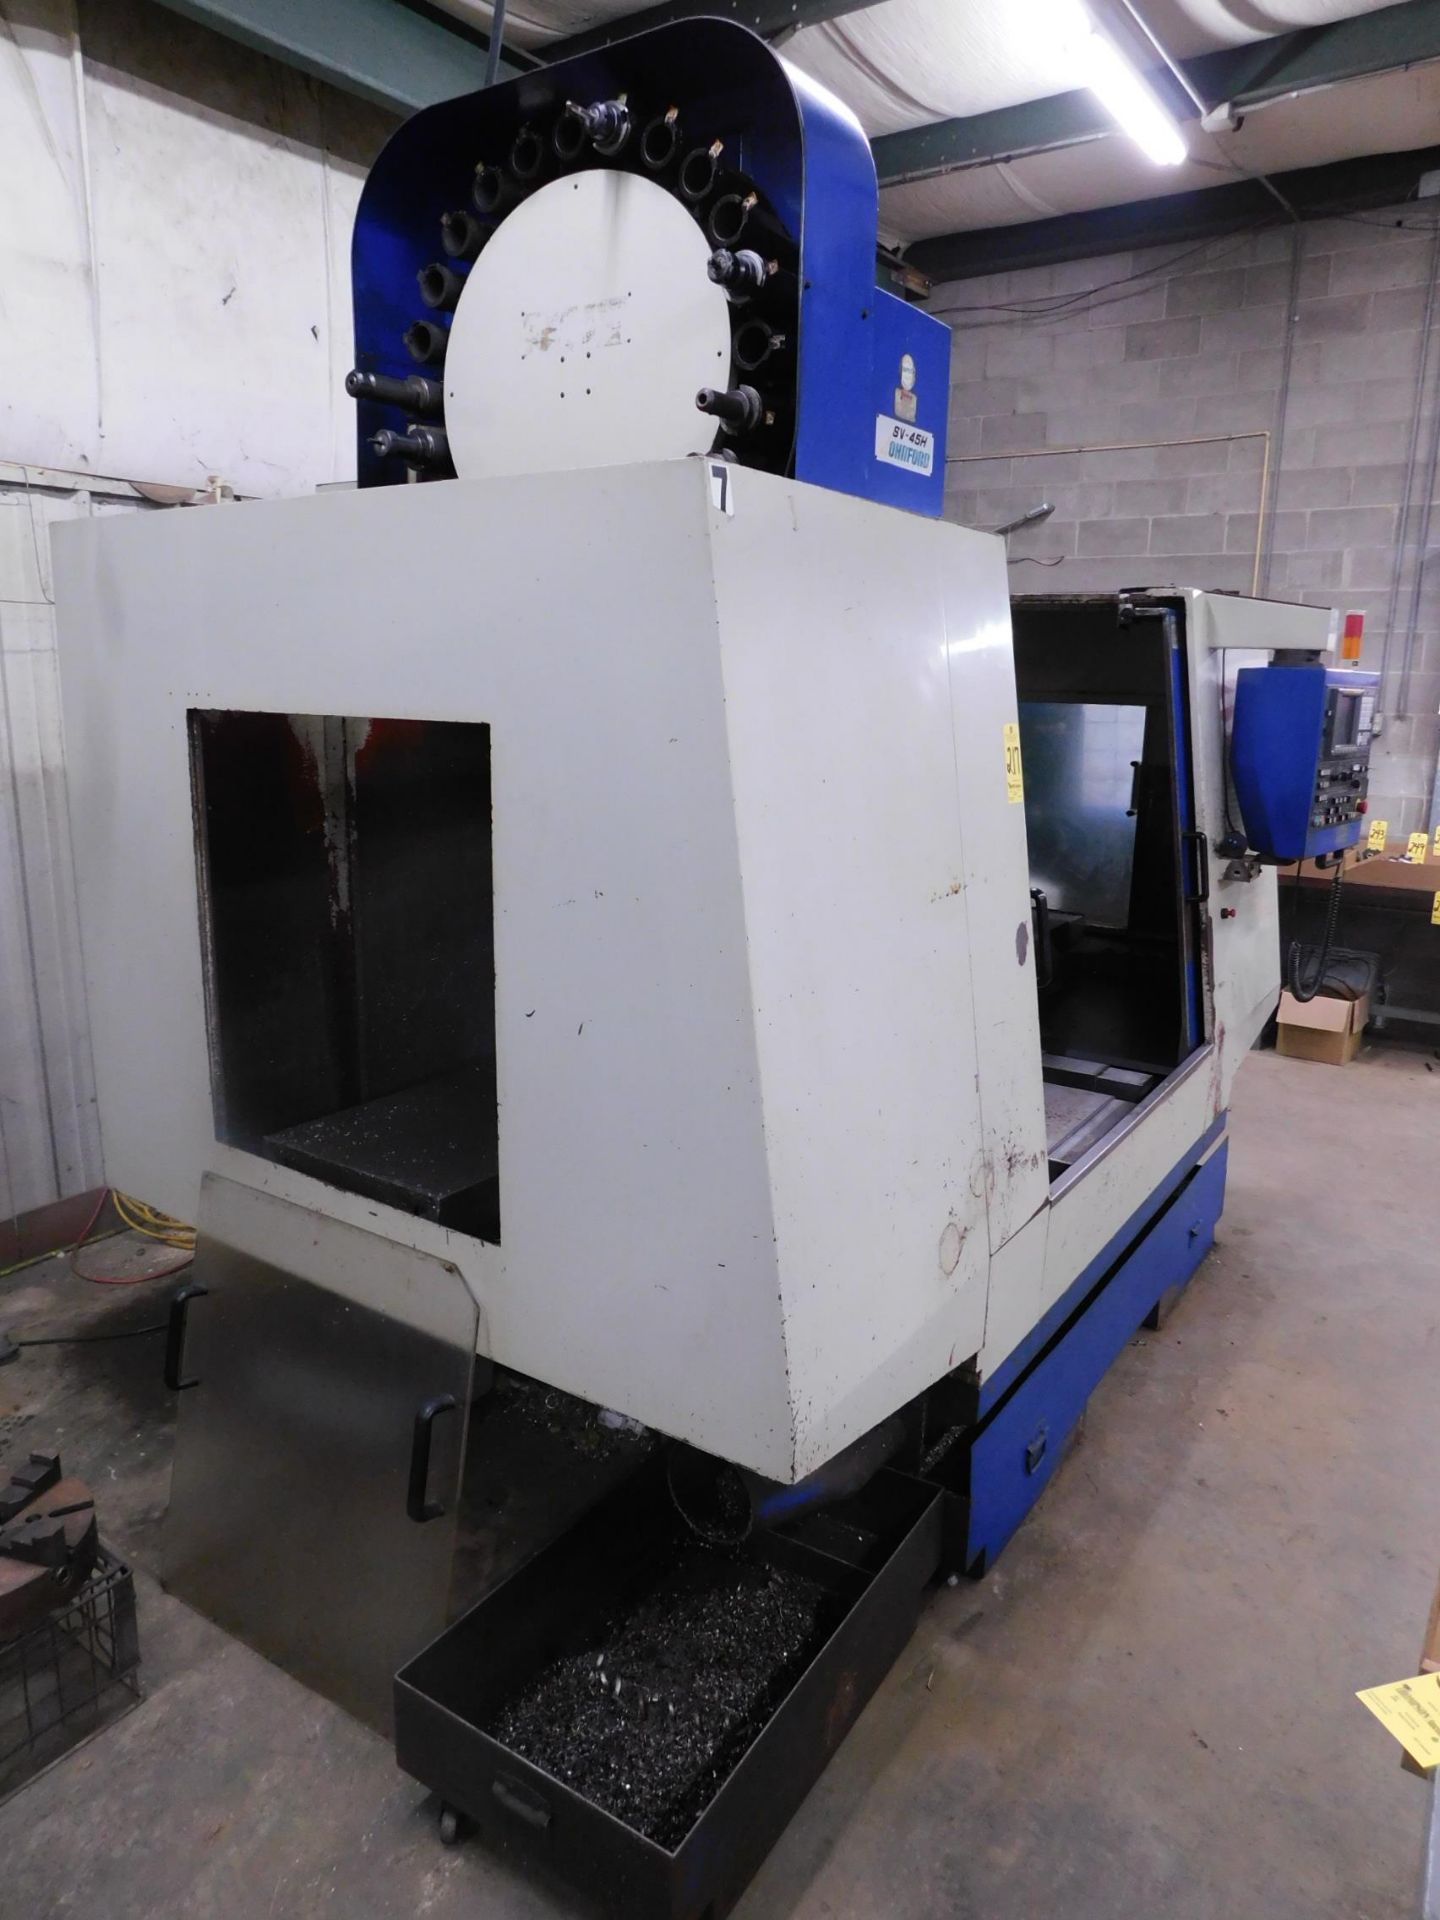 Johnford SV-45H CNC Vertical Machining Center, SN VU8123, New in 1998, 19.7" x 48" Table, Fanuc 18M - Image 4 of 16